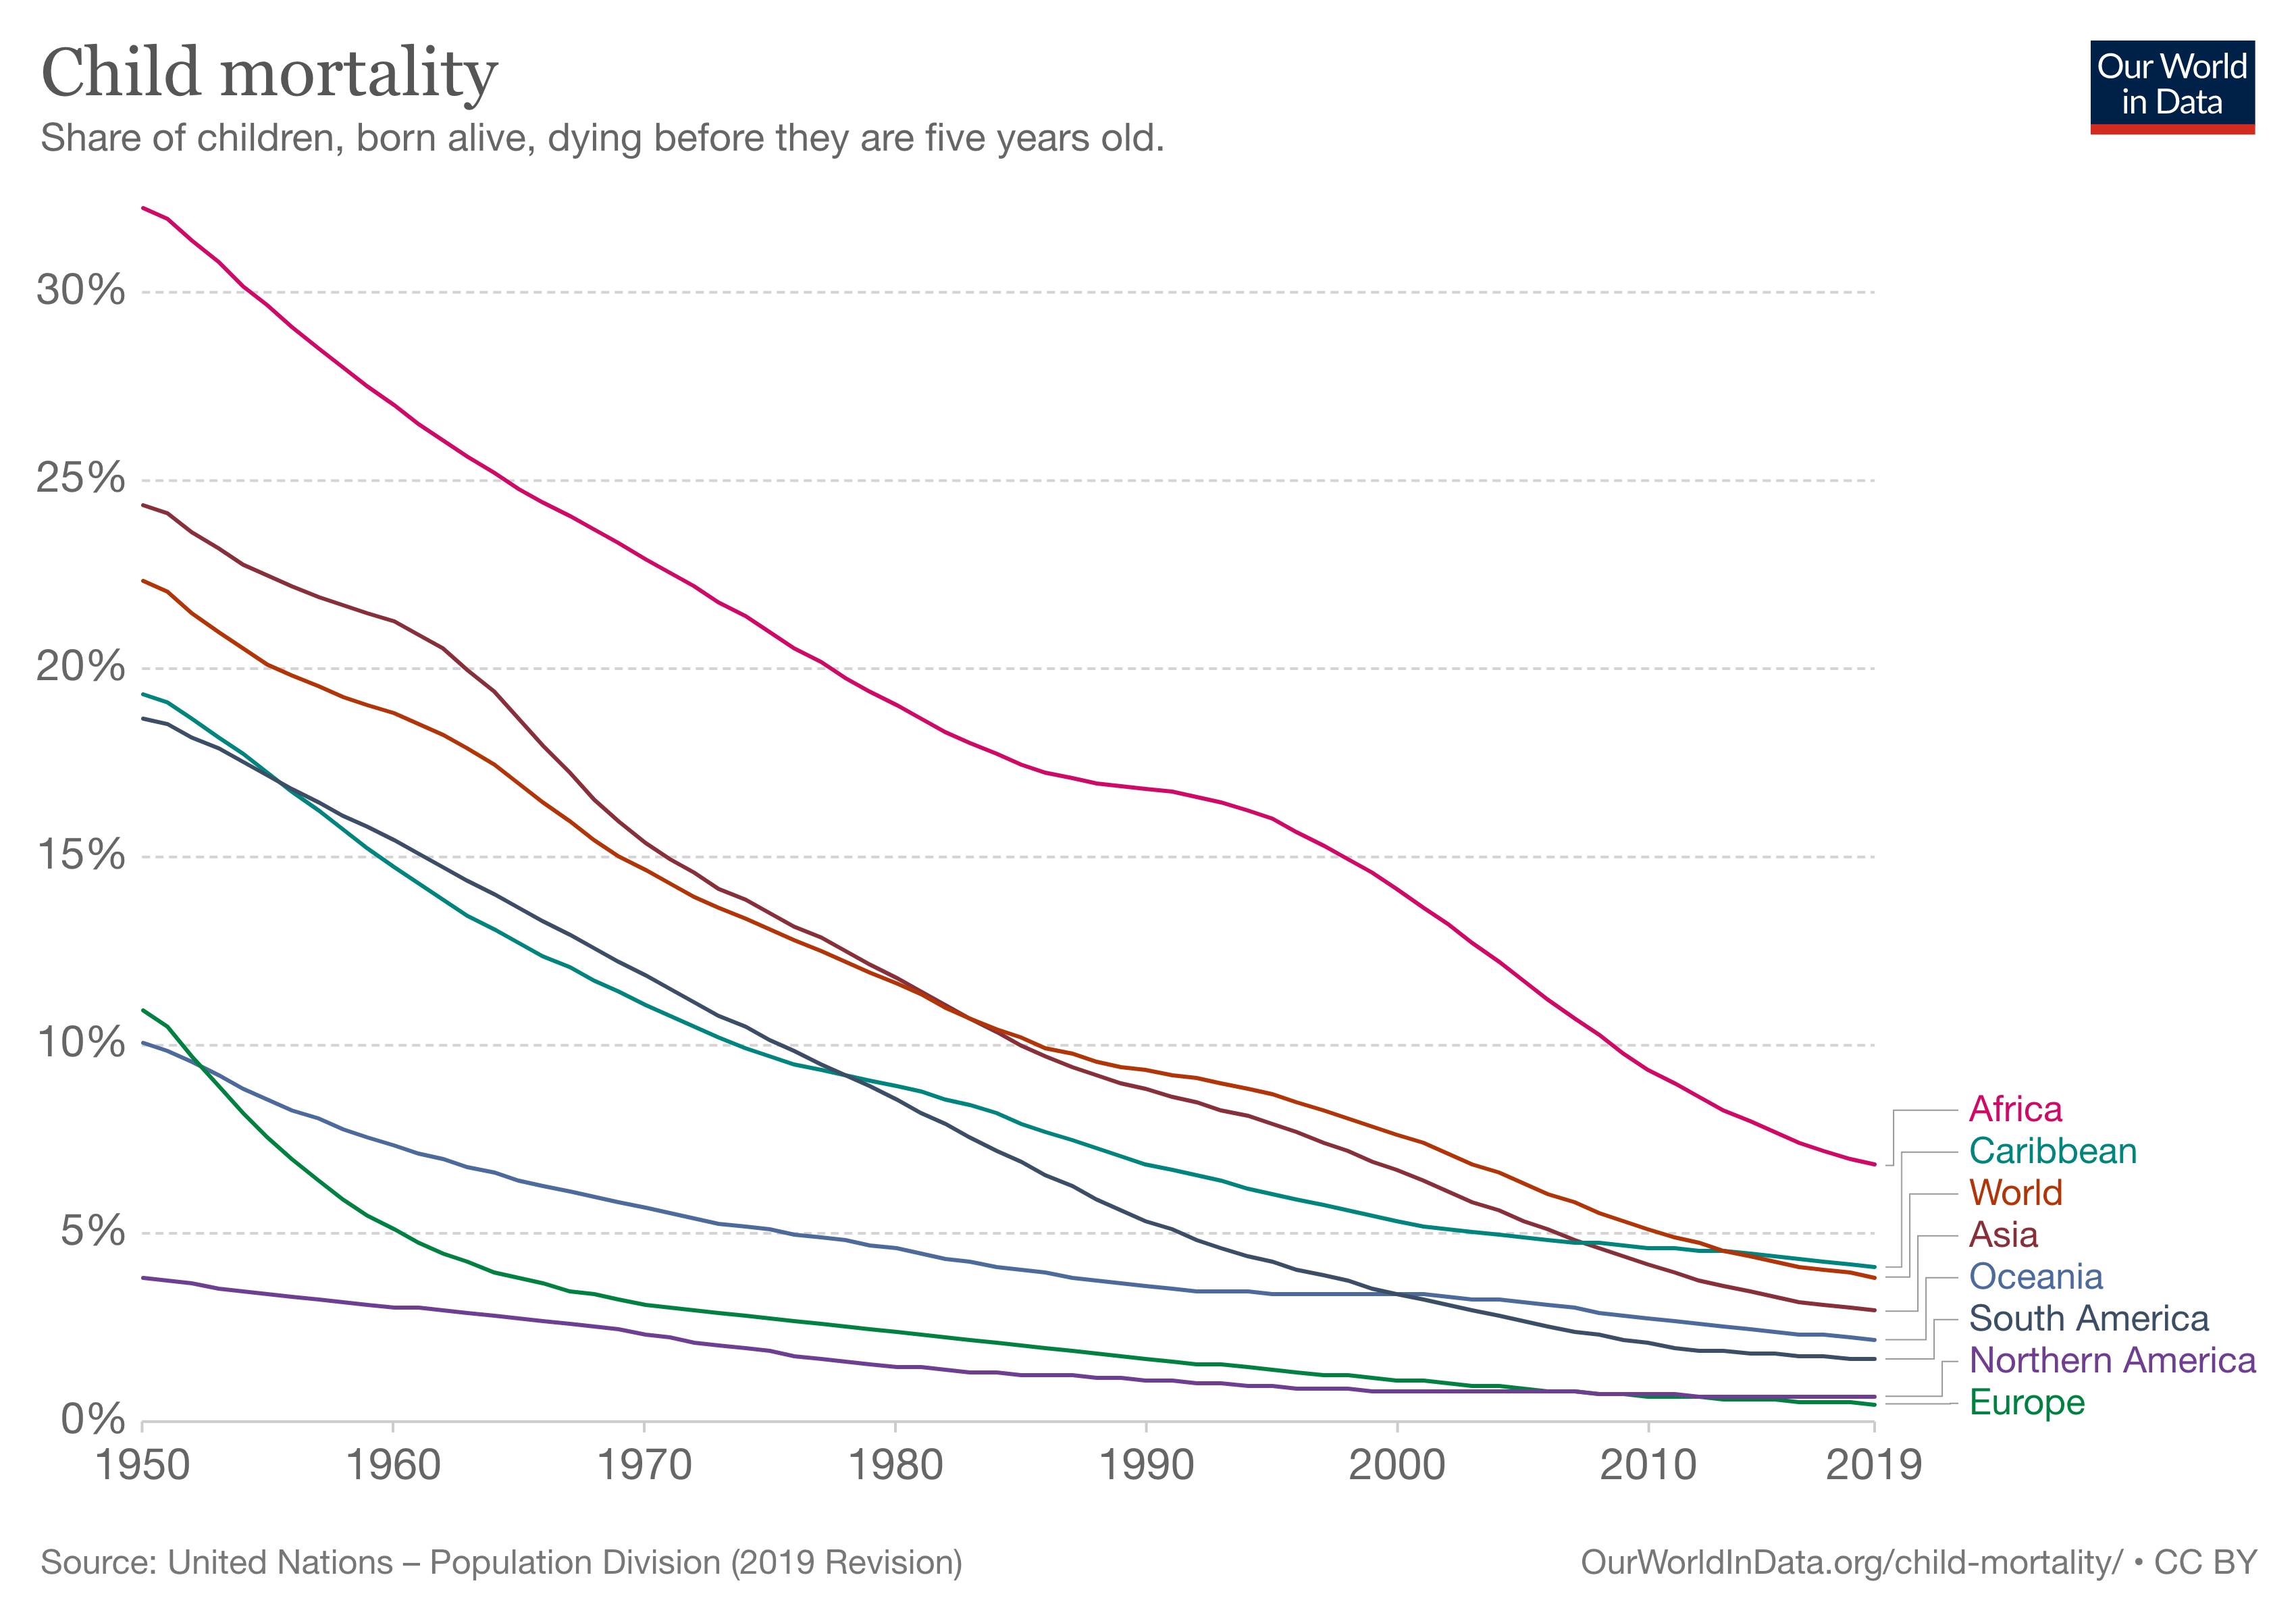 Child mortality rate by region 1950-2019